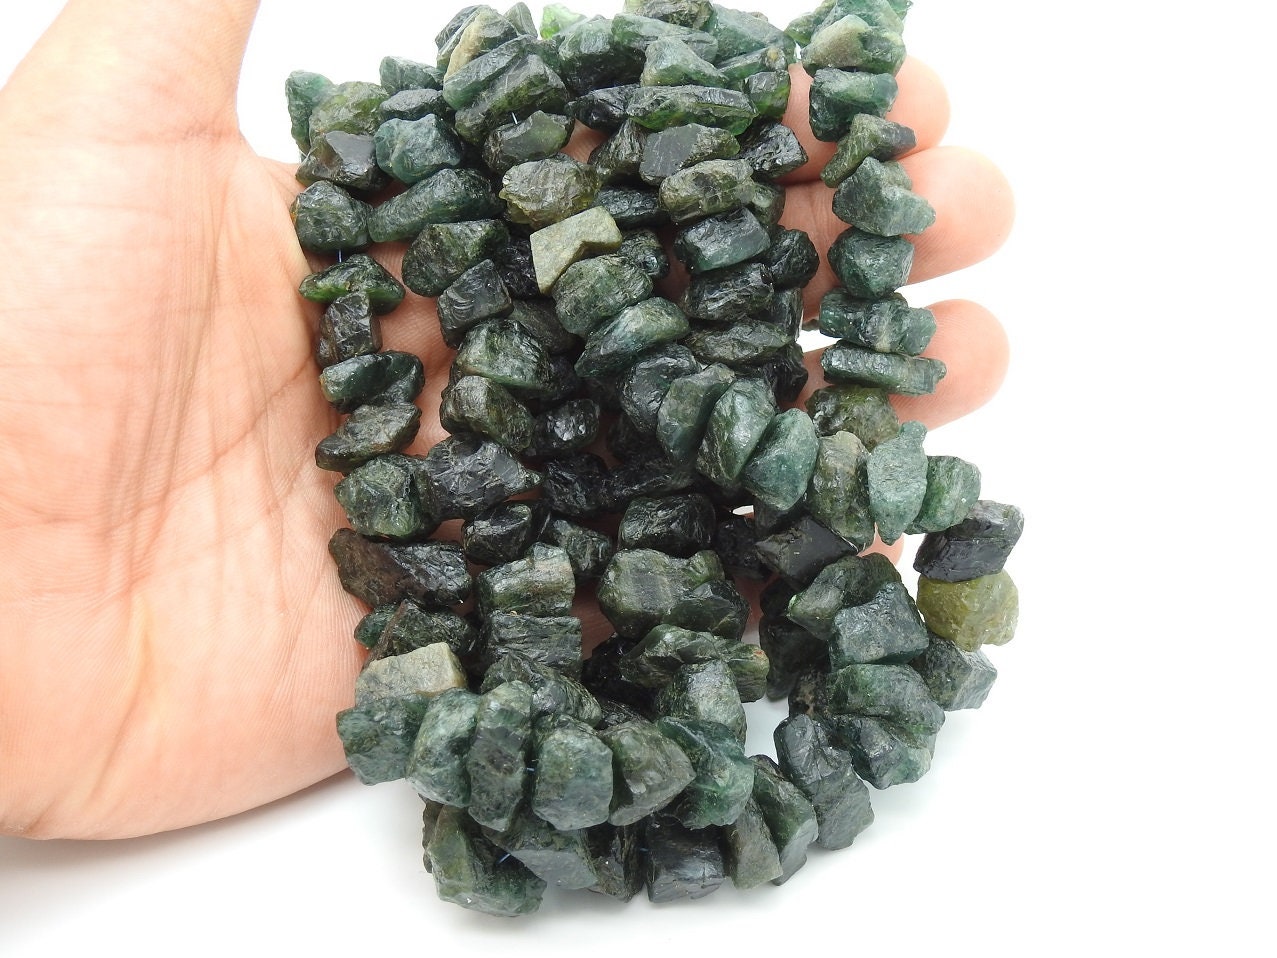 Dark Green Apatite Rough Bead,Anklets,Uncut,Chips,Nuggets,Loose Raw,8Inch Strand 15X10To6X5MM Approx,Wholesaler,Supplies 100%Natural PME-RB5 | Save 33% - Rajasthan Living 13